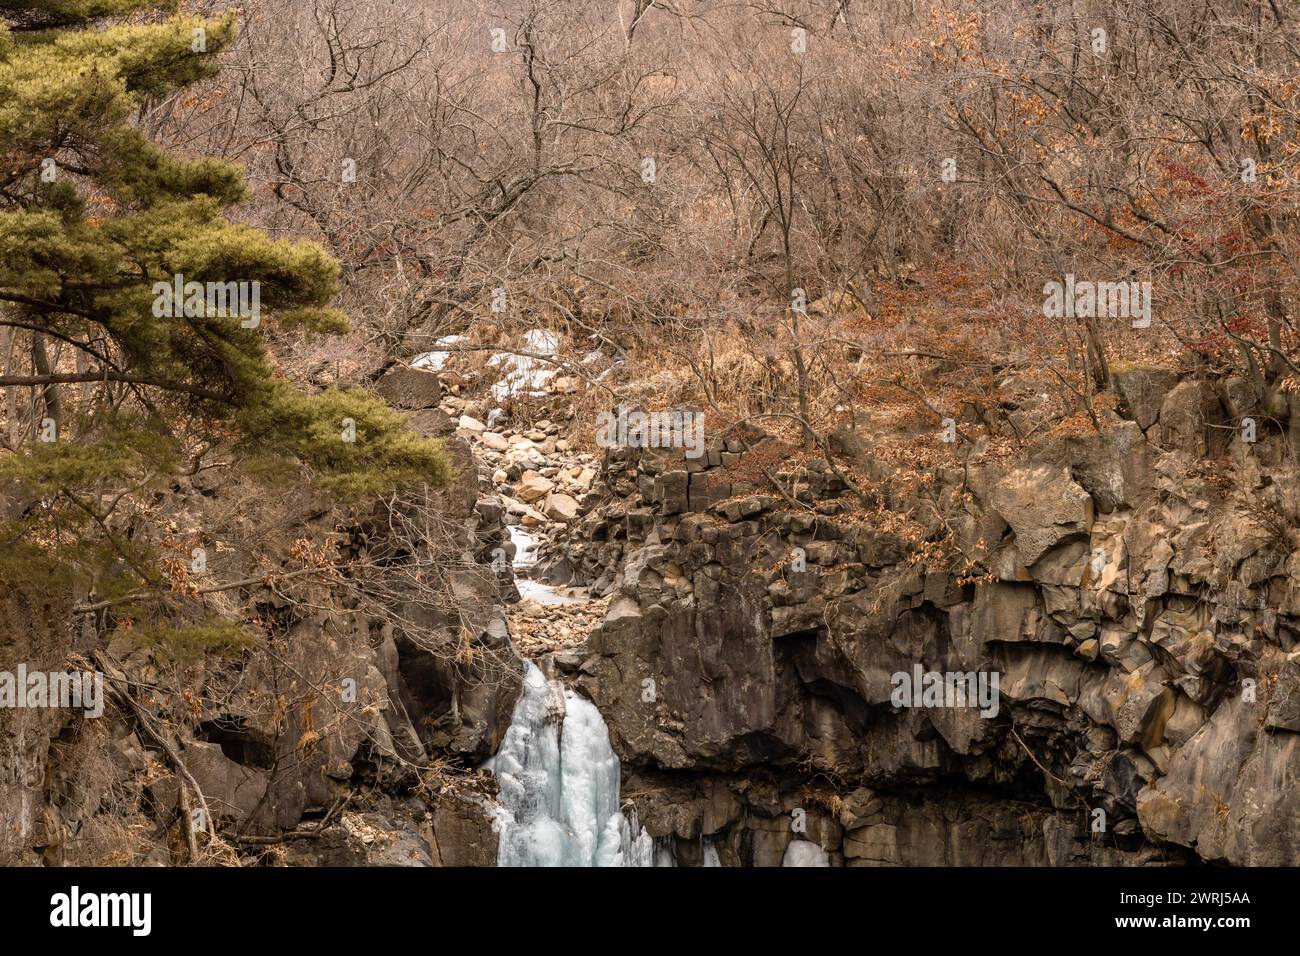 Winter landscape of dry riverbed that feeds Jaein waterfall in Gyeonggi province, South Korea Stock Photo